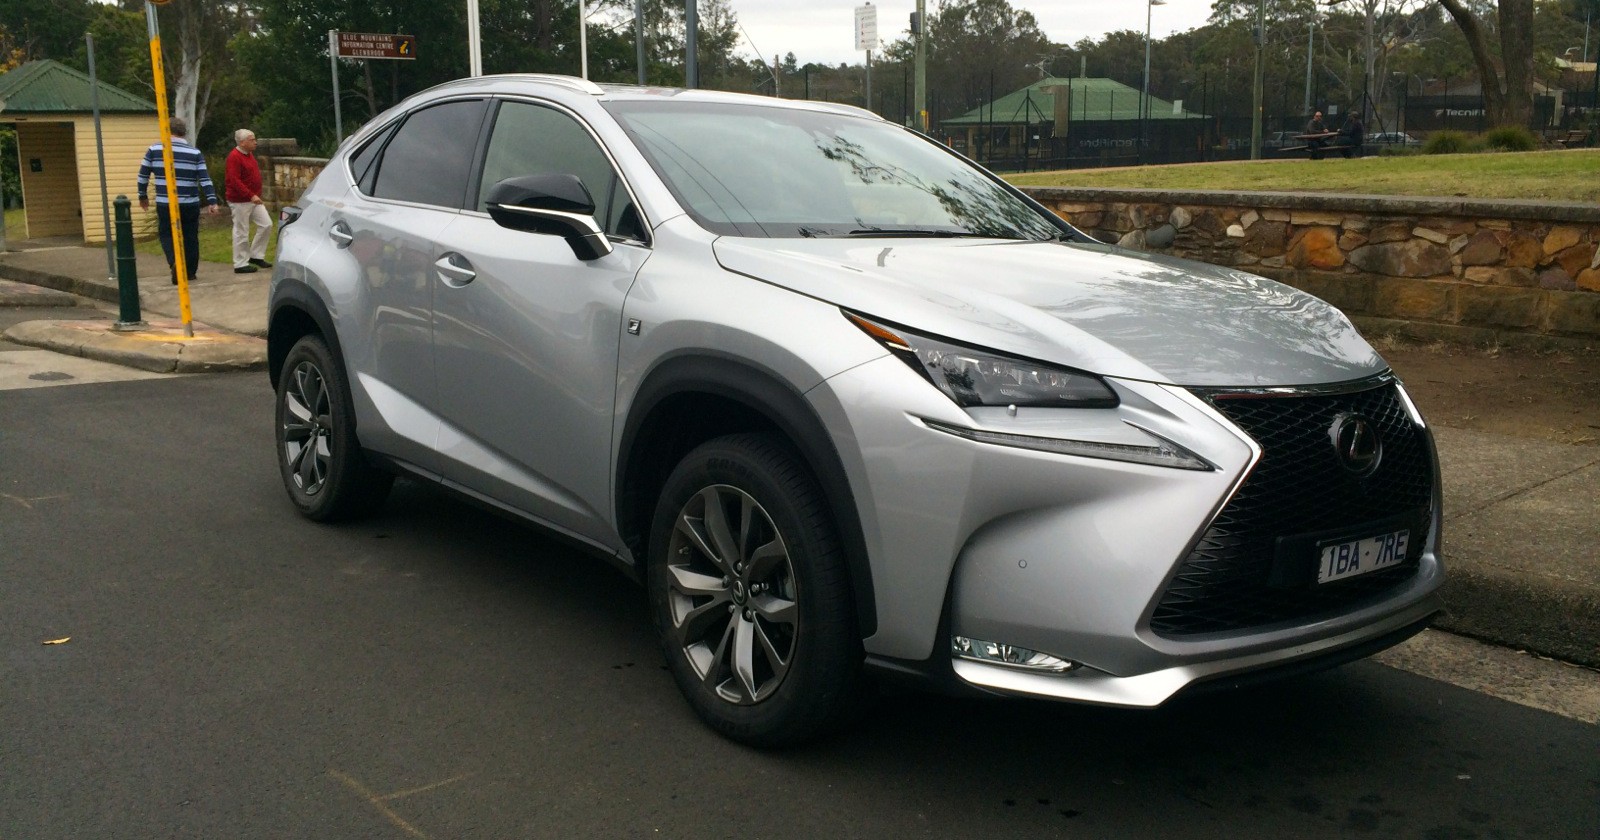 2015 Lexus NX200t spotted in the Blue Mountains months